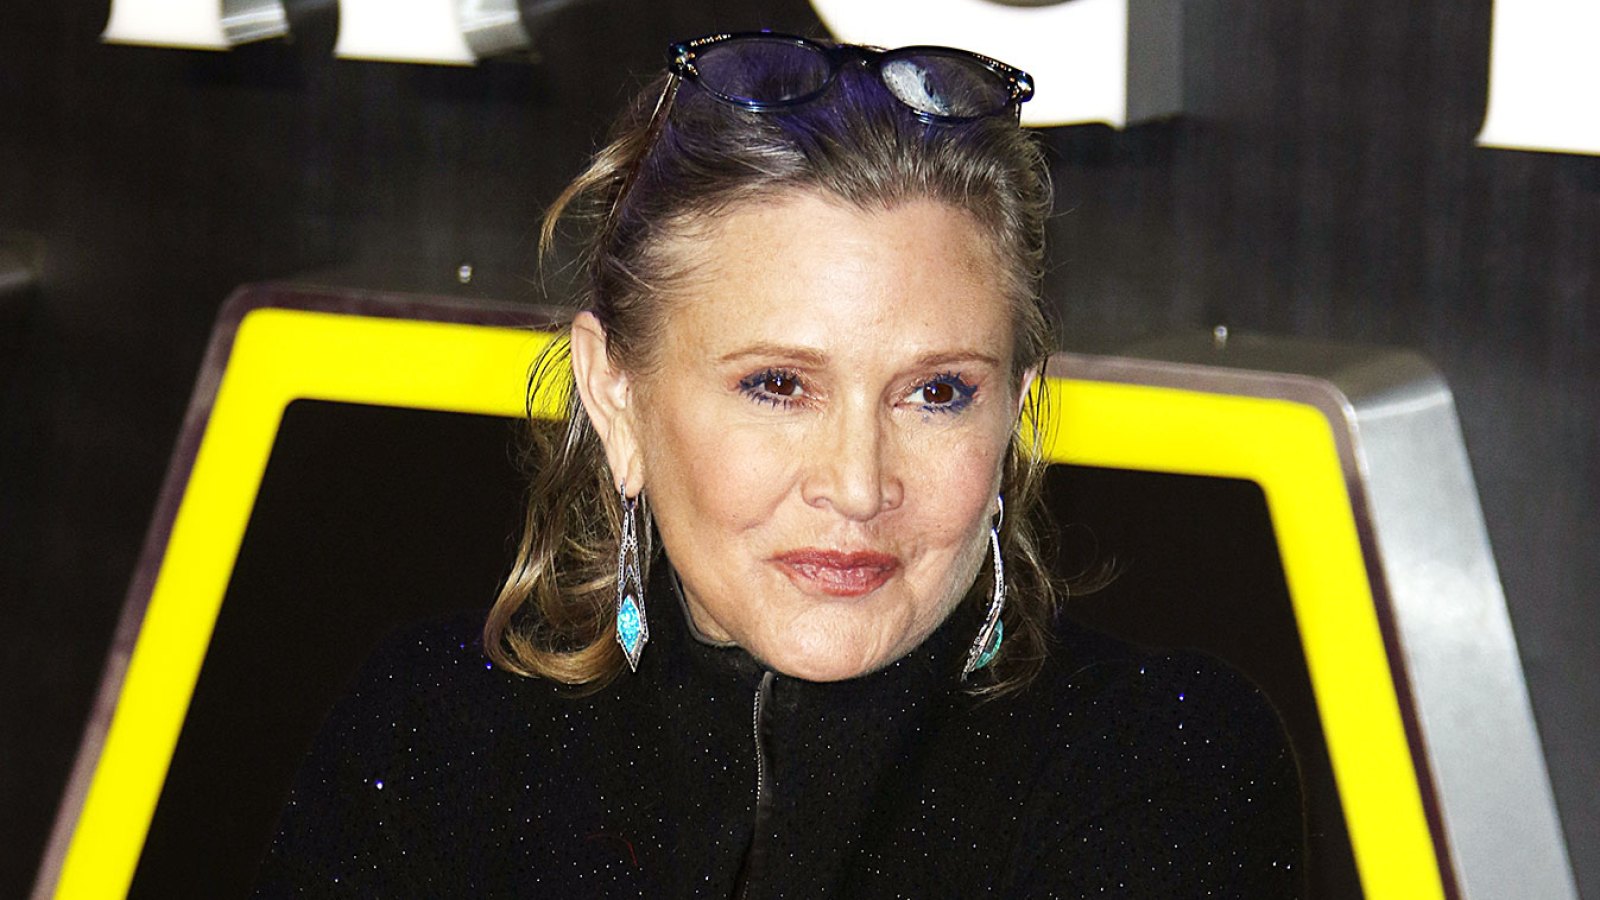 Carrie Fisher star wars movie